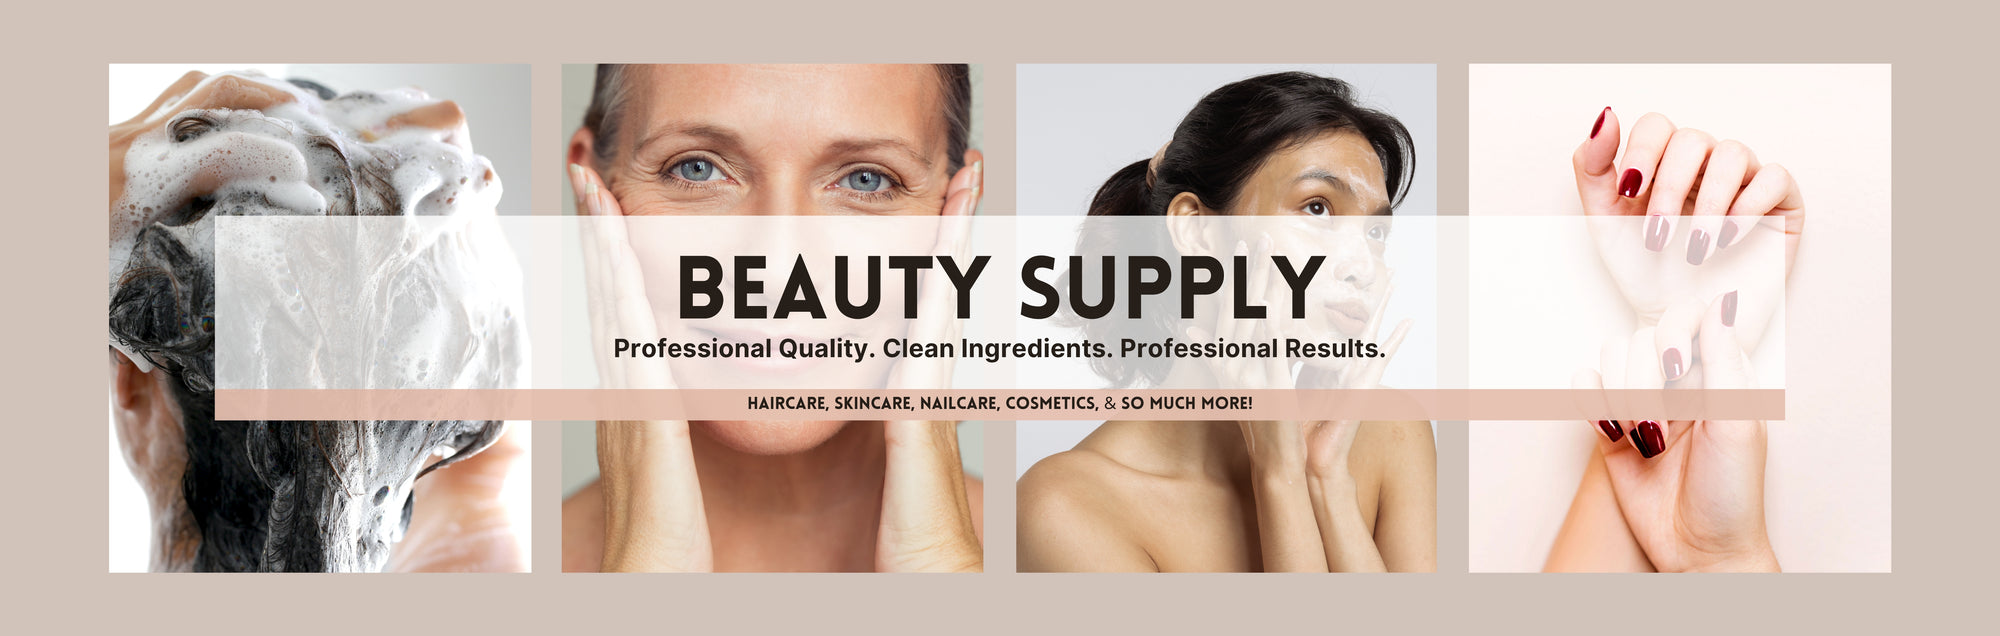 Professional Beauty Supply and Salon